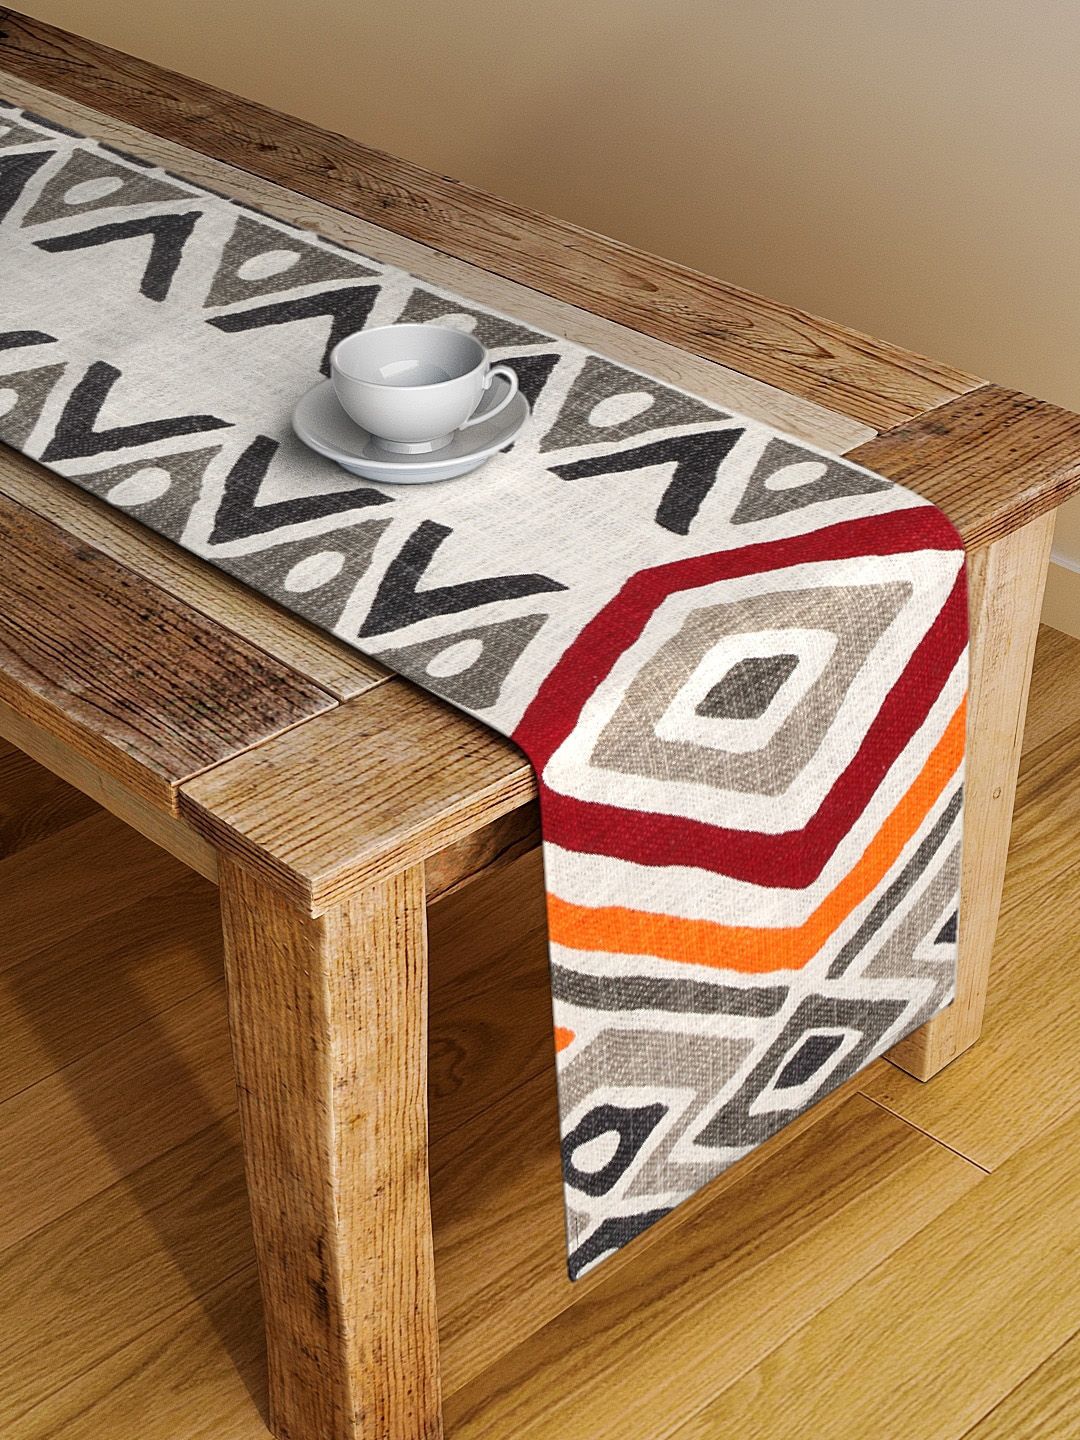 BLANC9 White & Grey Printed Cotton Table Runner Price in India